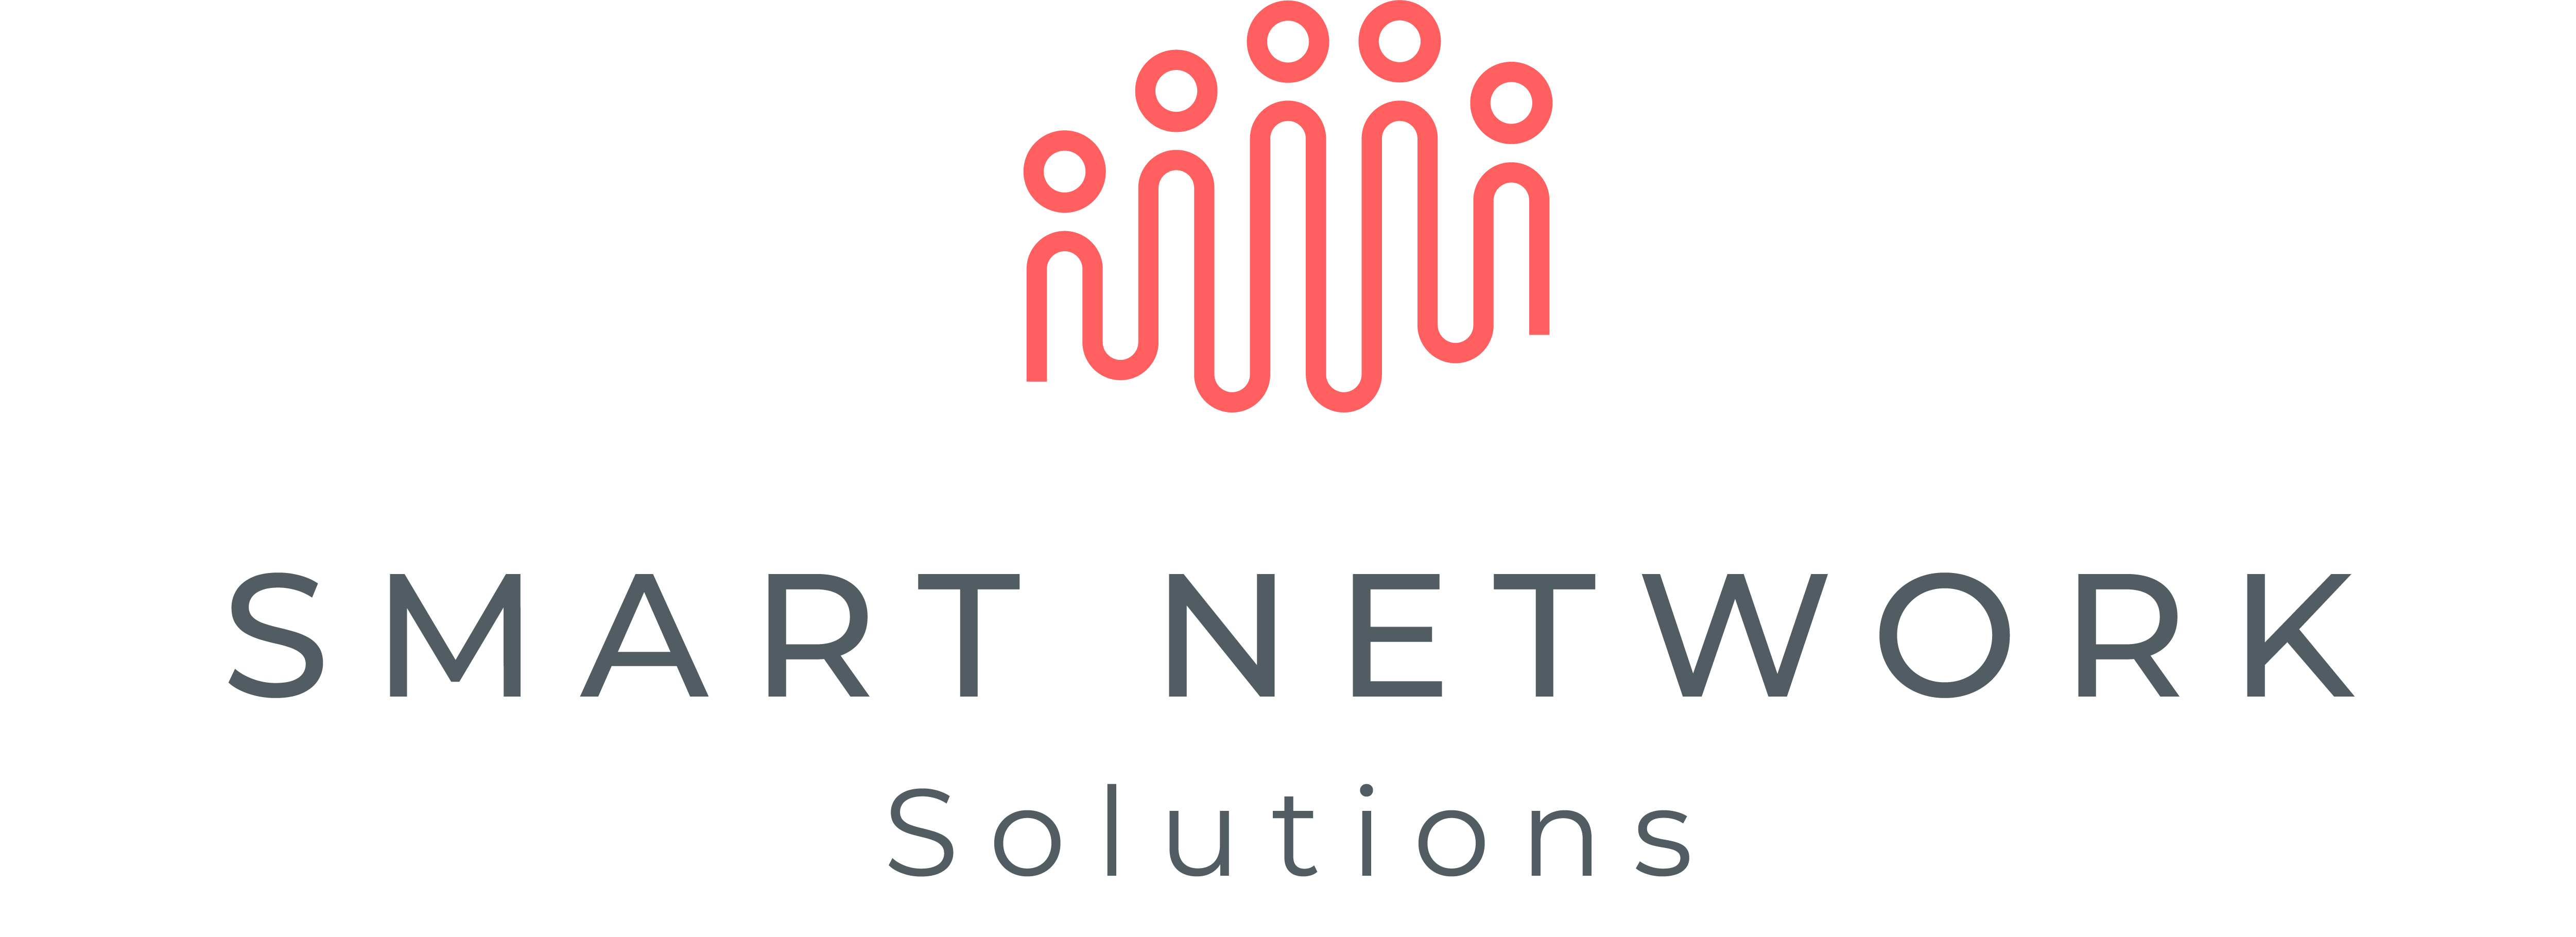 Smart Network Solutions